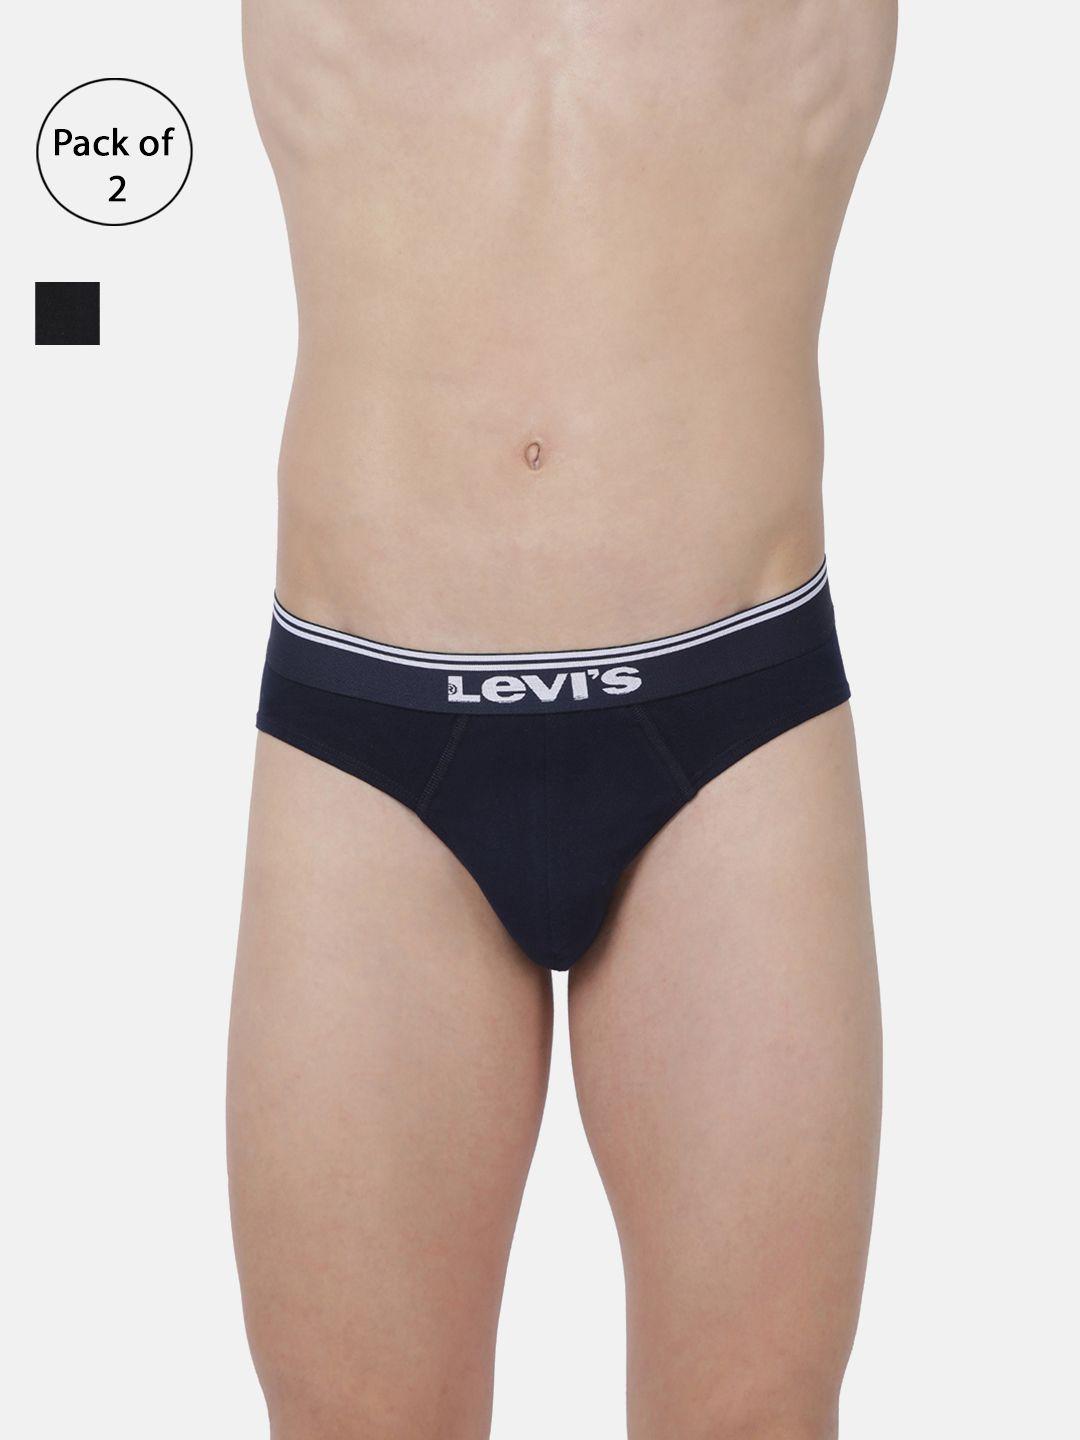 levis-men-pack-of-2-solid-briefs-bf-200sf-2pk-style-017-439